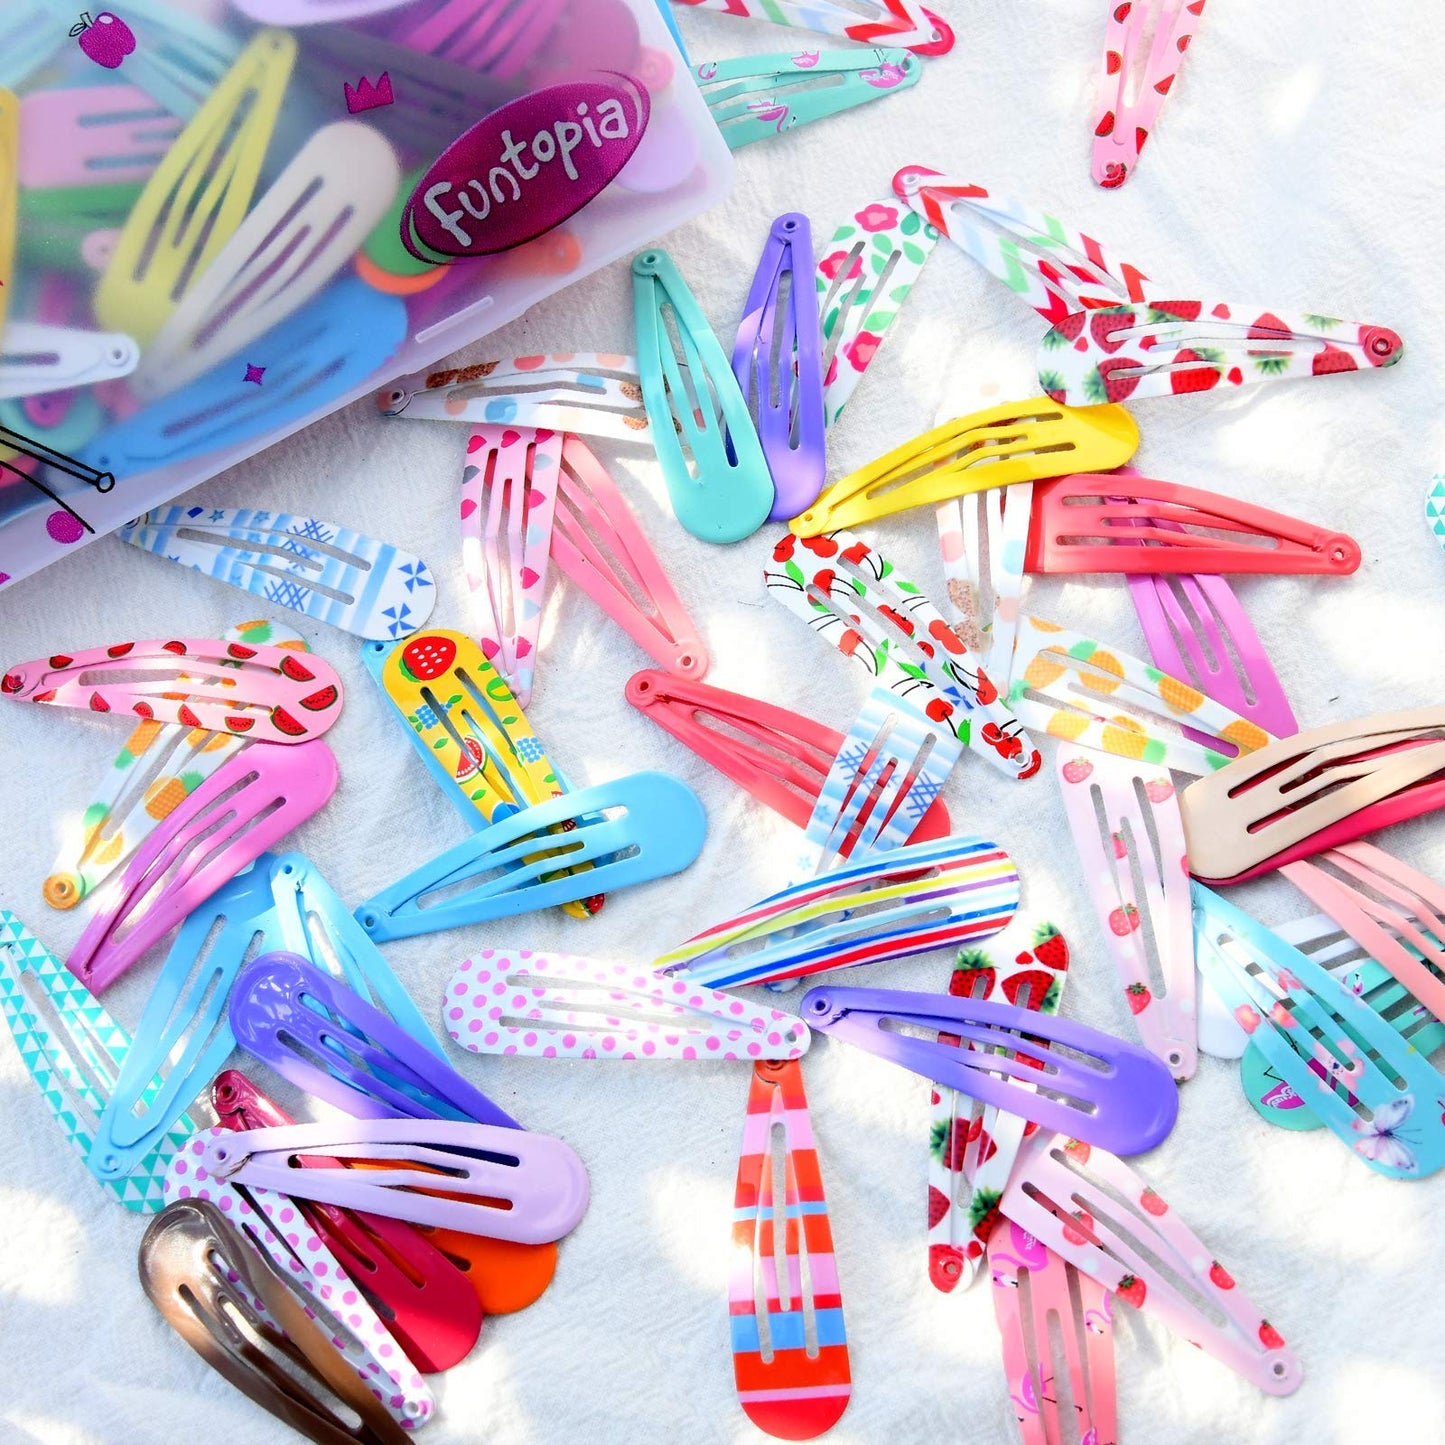 120 Pcs Hair Clips for Girls, Funtopia 2 Inch Girls Hair Clips Non Slip Metal Snap Hair Clips for Kids Teens Women, Cute Candy Color Barrettes Hair Accessories (40 Assorted Colors)